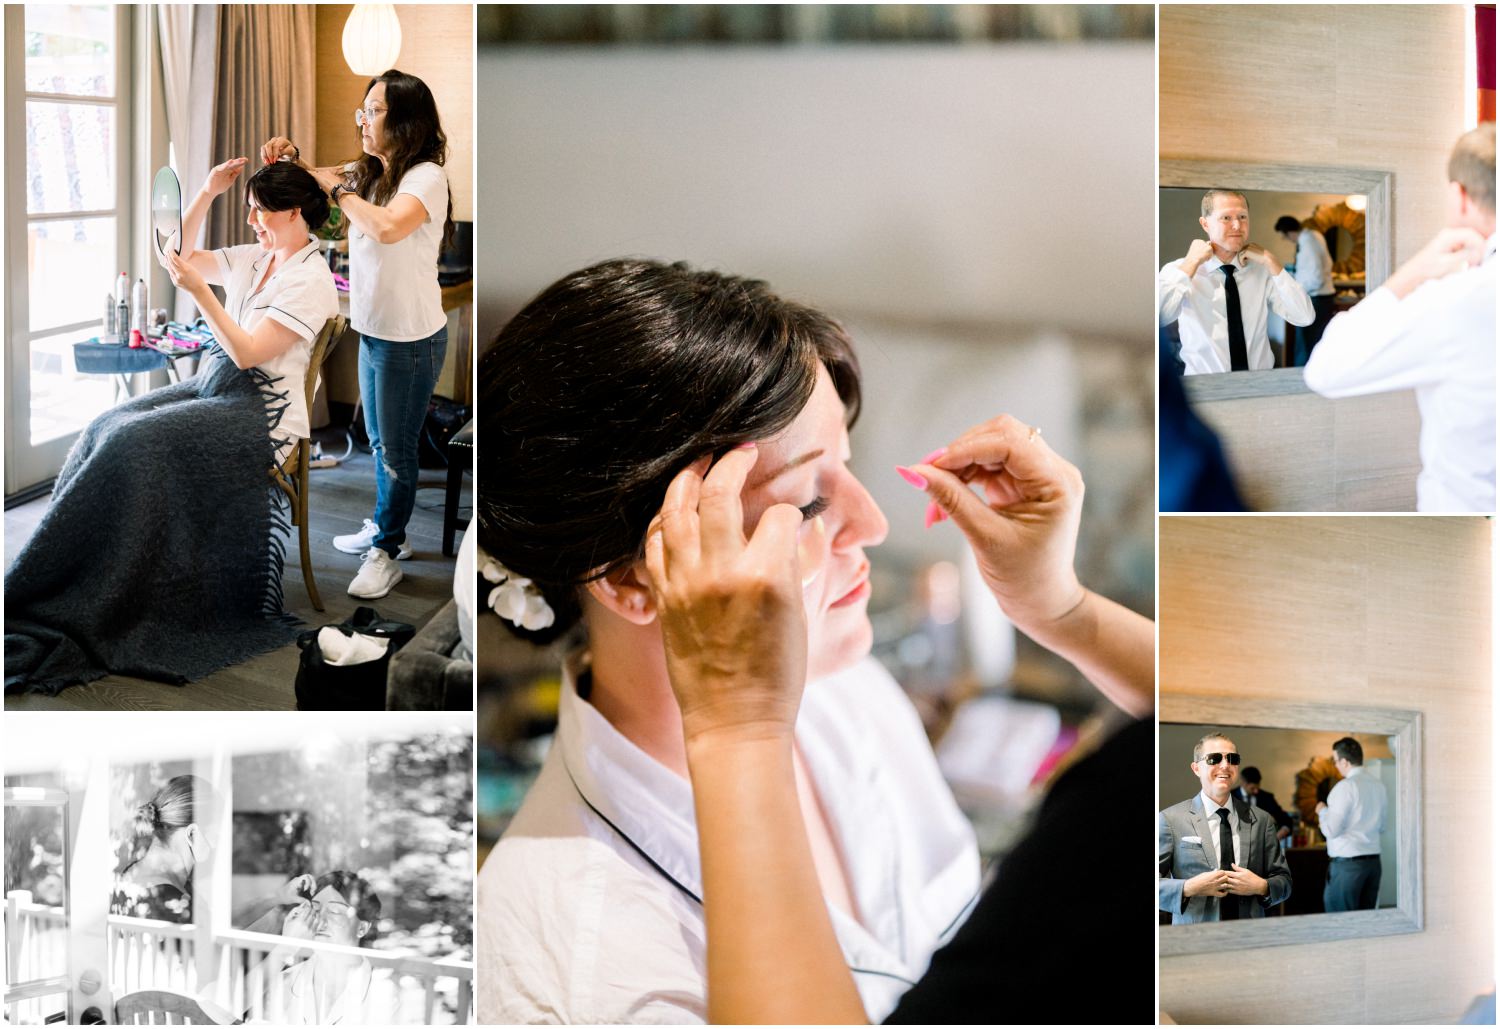 collage of man and woman getting ready for an event